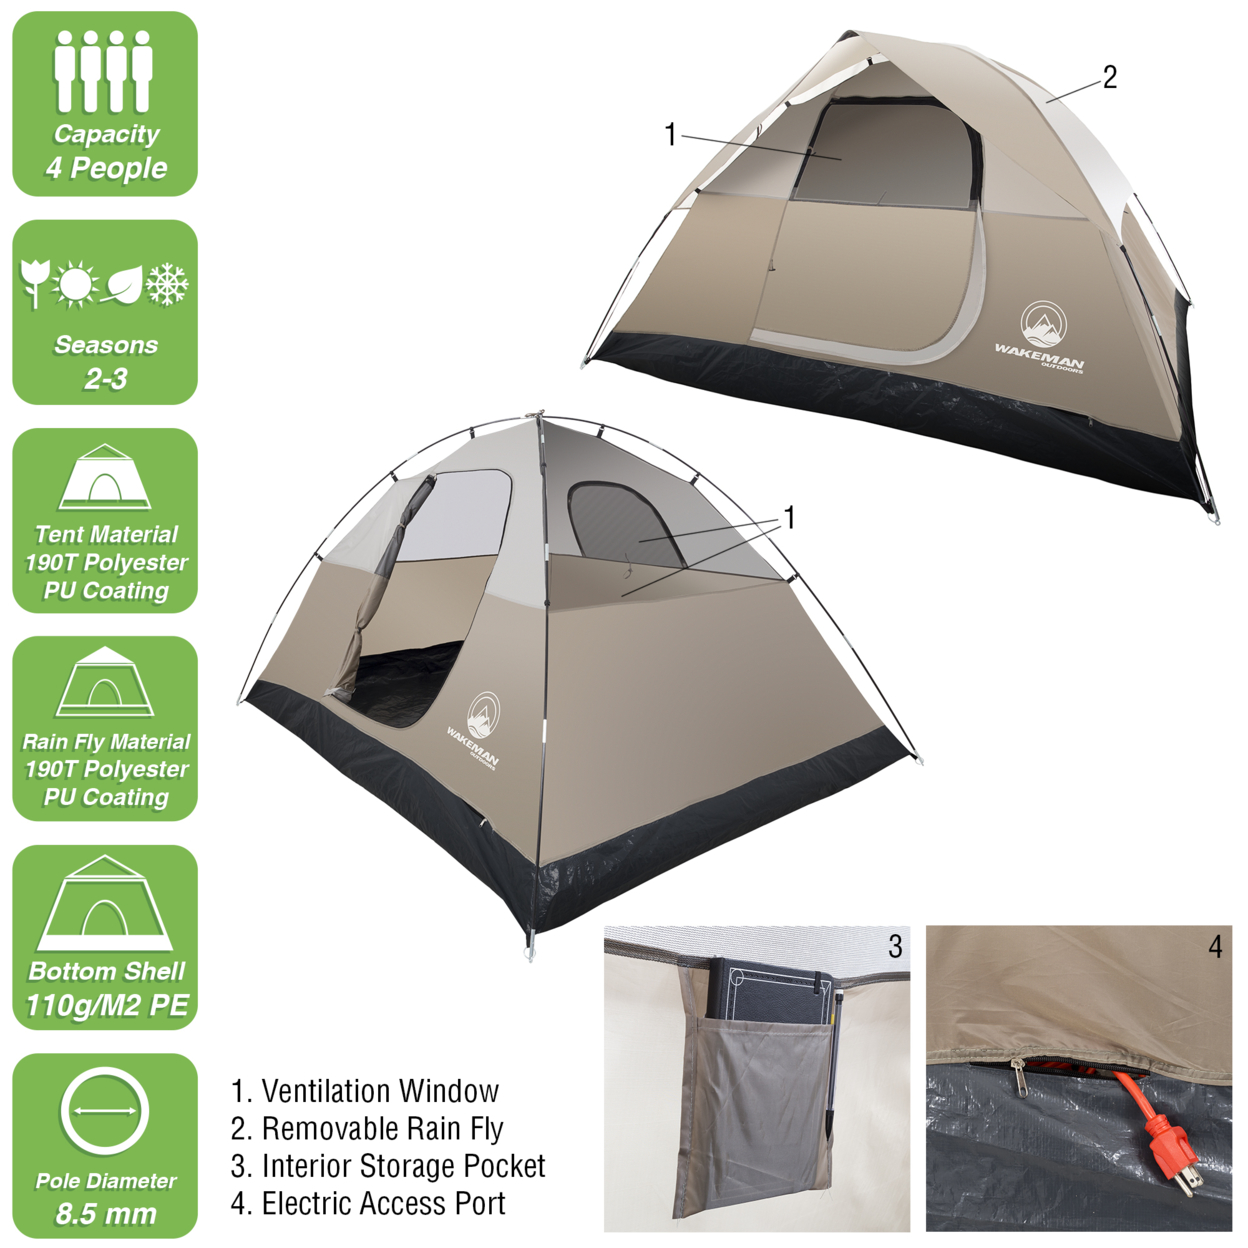 4-Person Tent, Water Resistant Dome Tent For Camping With Removable Rain Fly And Carry Bag, Rebel Bay 4 Person Tent (Tan)